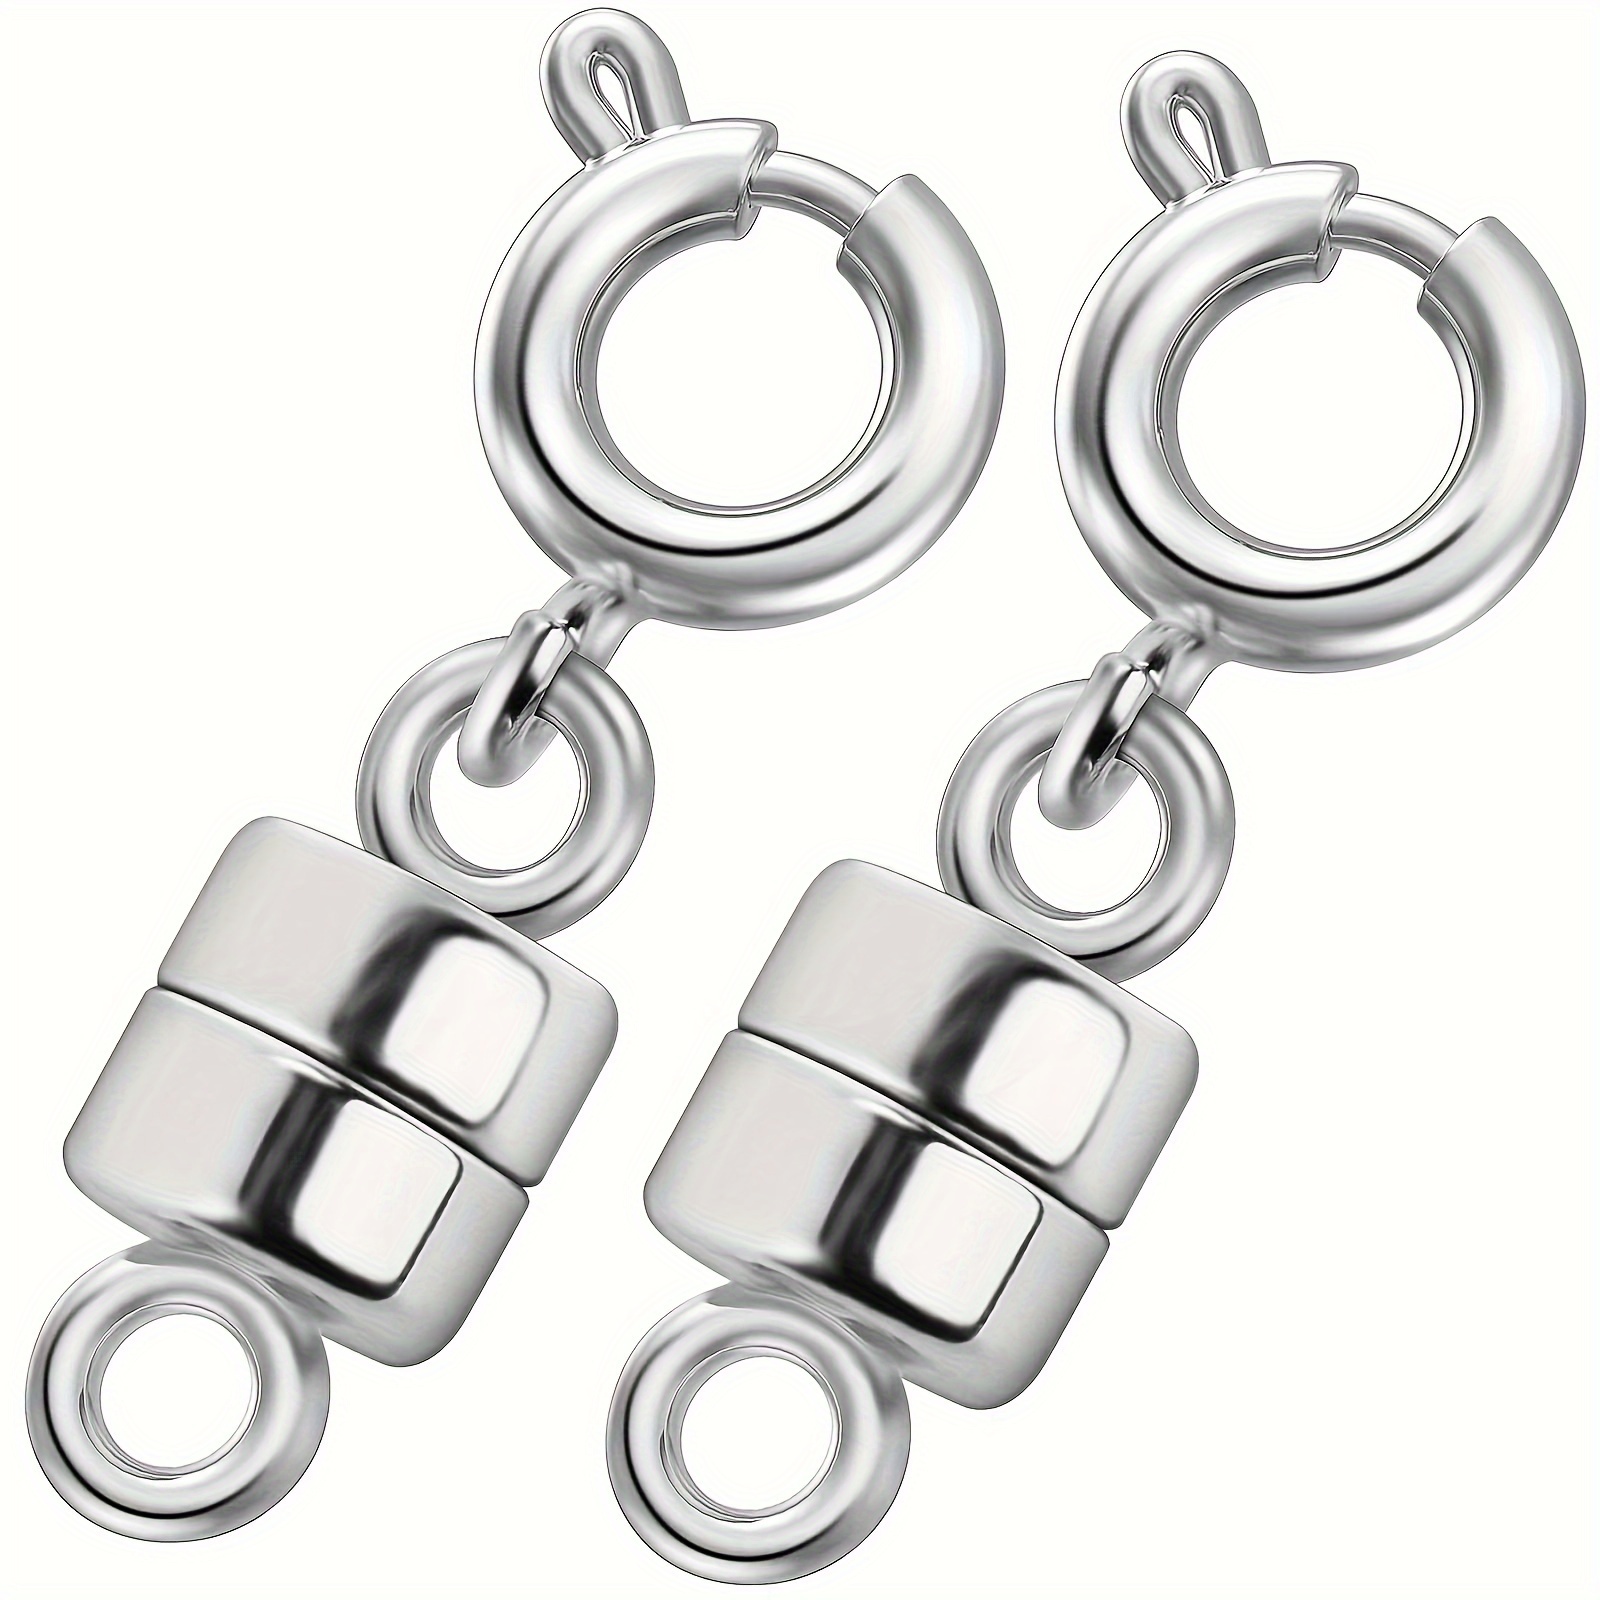 8pcs Stainless Steel Magnetic Necklace Extenders Magnetic Necklace